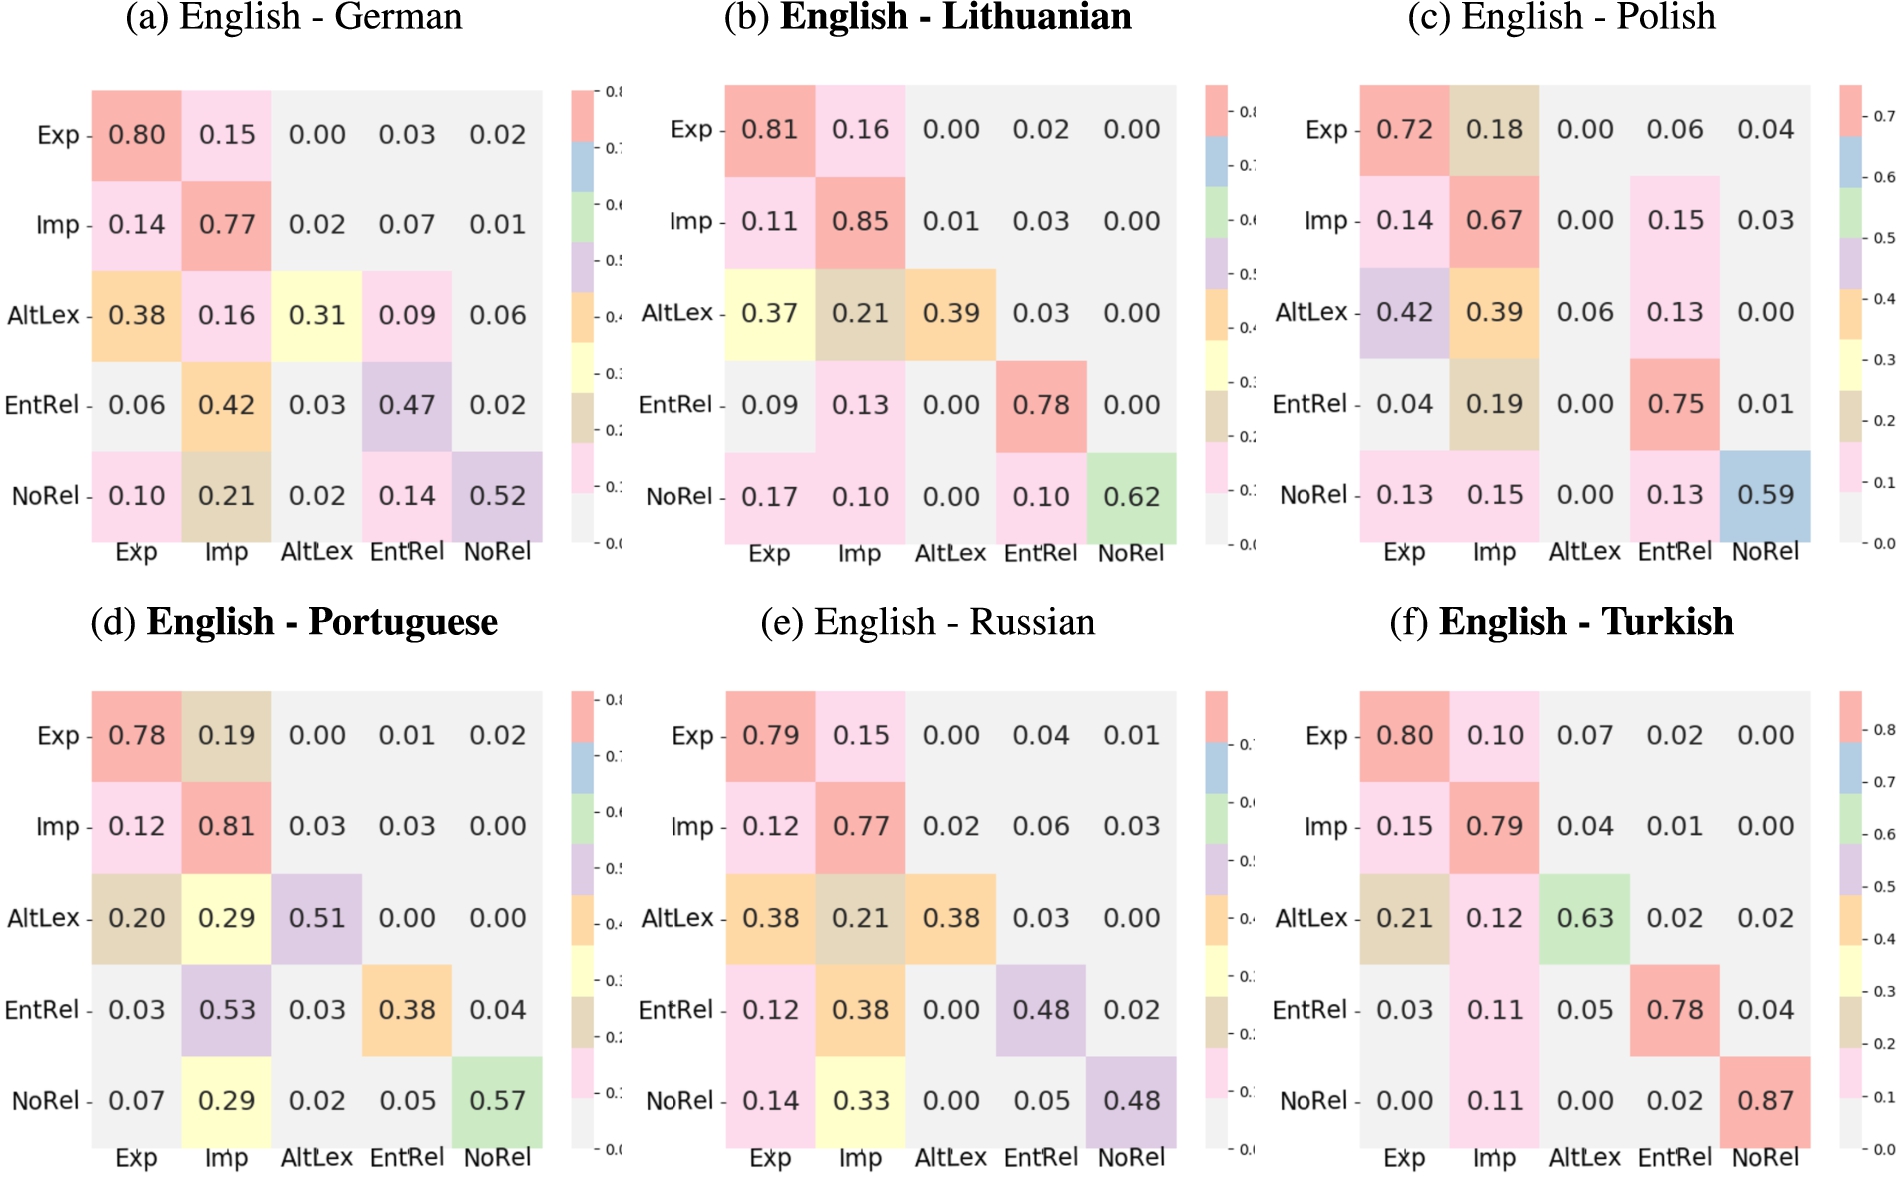 Heatmap visualizations of the confusion matrices for relation type of the linked discourse relations. Rows correspond to the English relations and columns denote target languages. The matrices are normalized row-wise where each cell denotes the percentage of English relations converted to the respective label in the target language. Confusion matrices created from manually-corrected links are highlighted in bold.